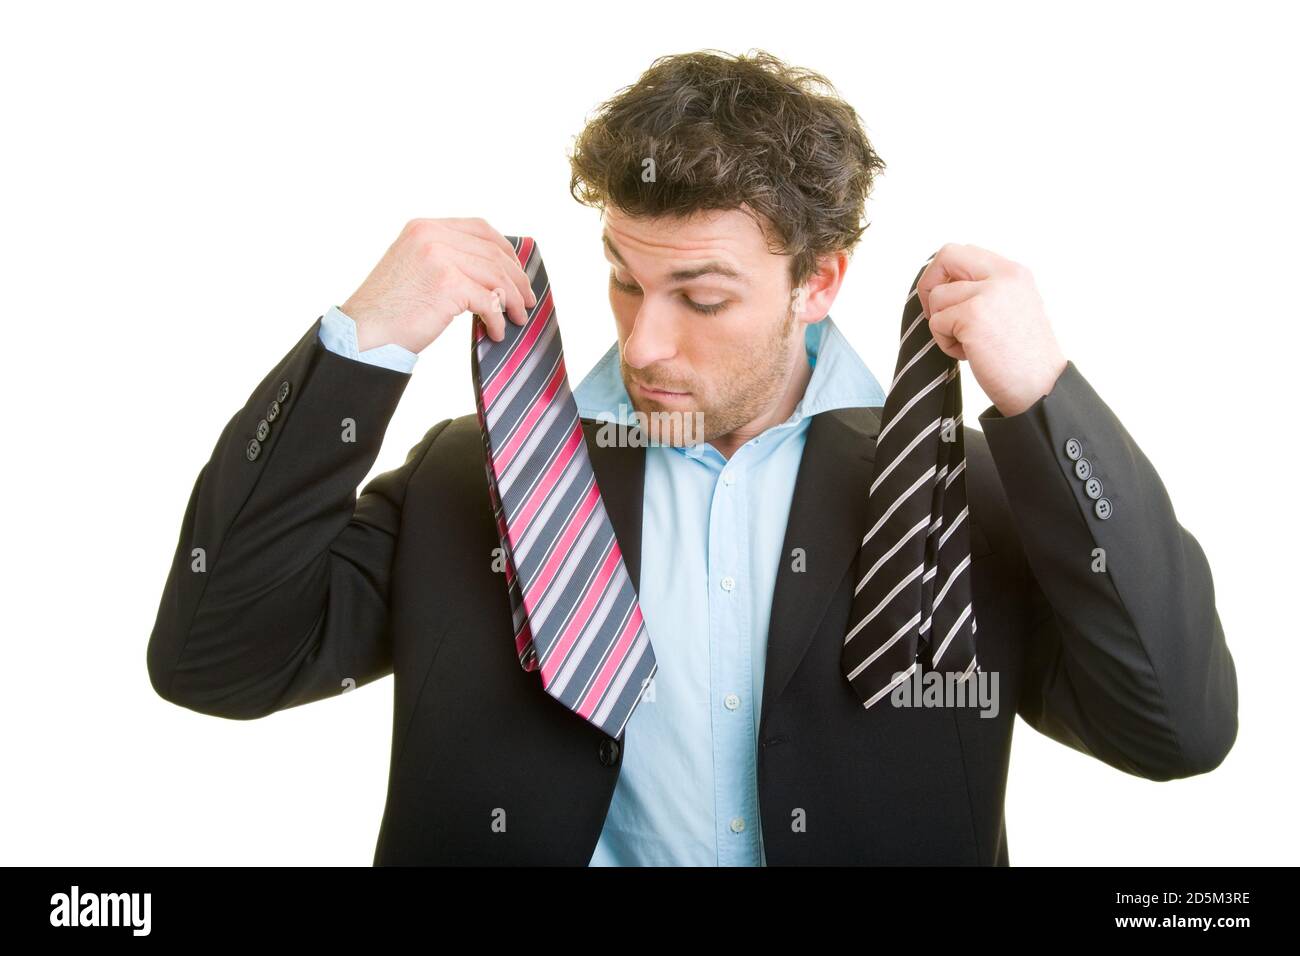 Young man in a suit decides on a tie Stock Photo